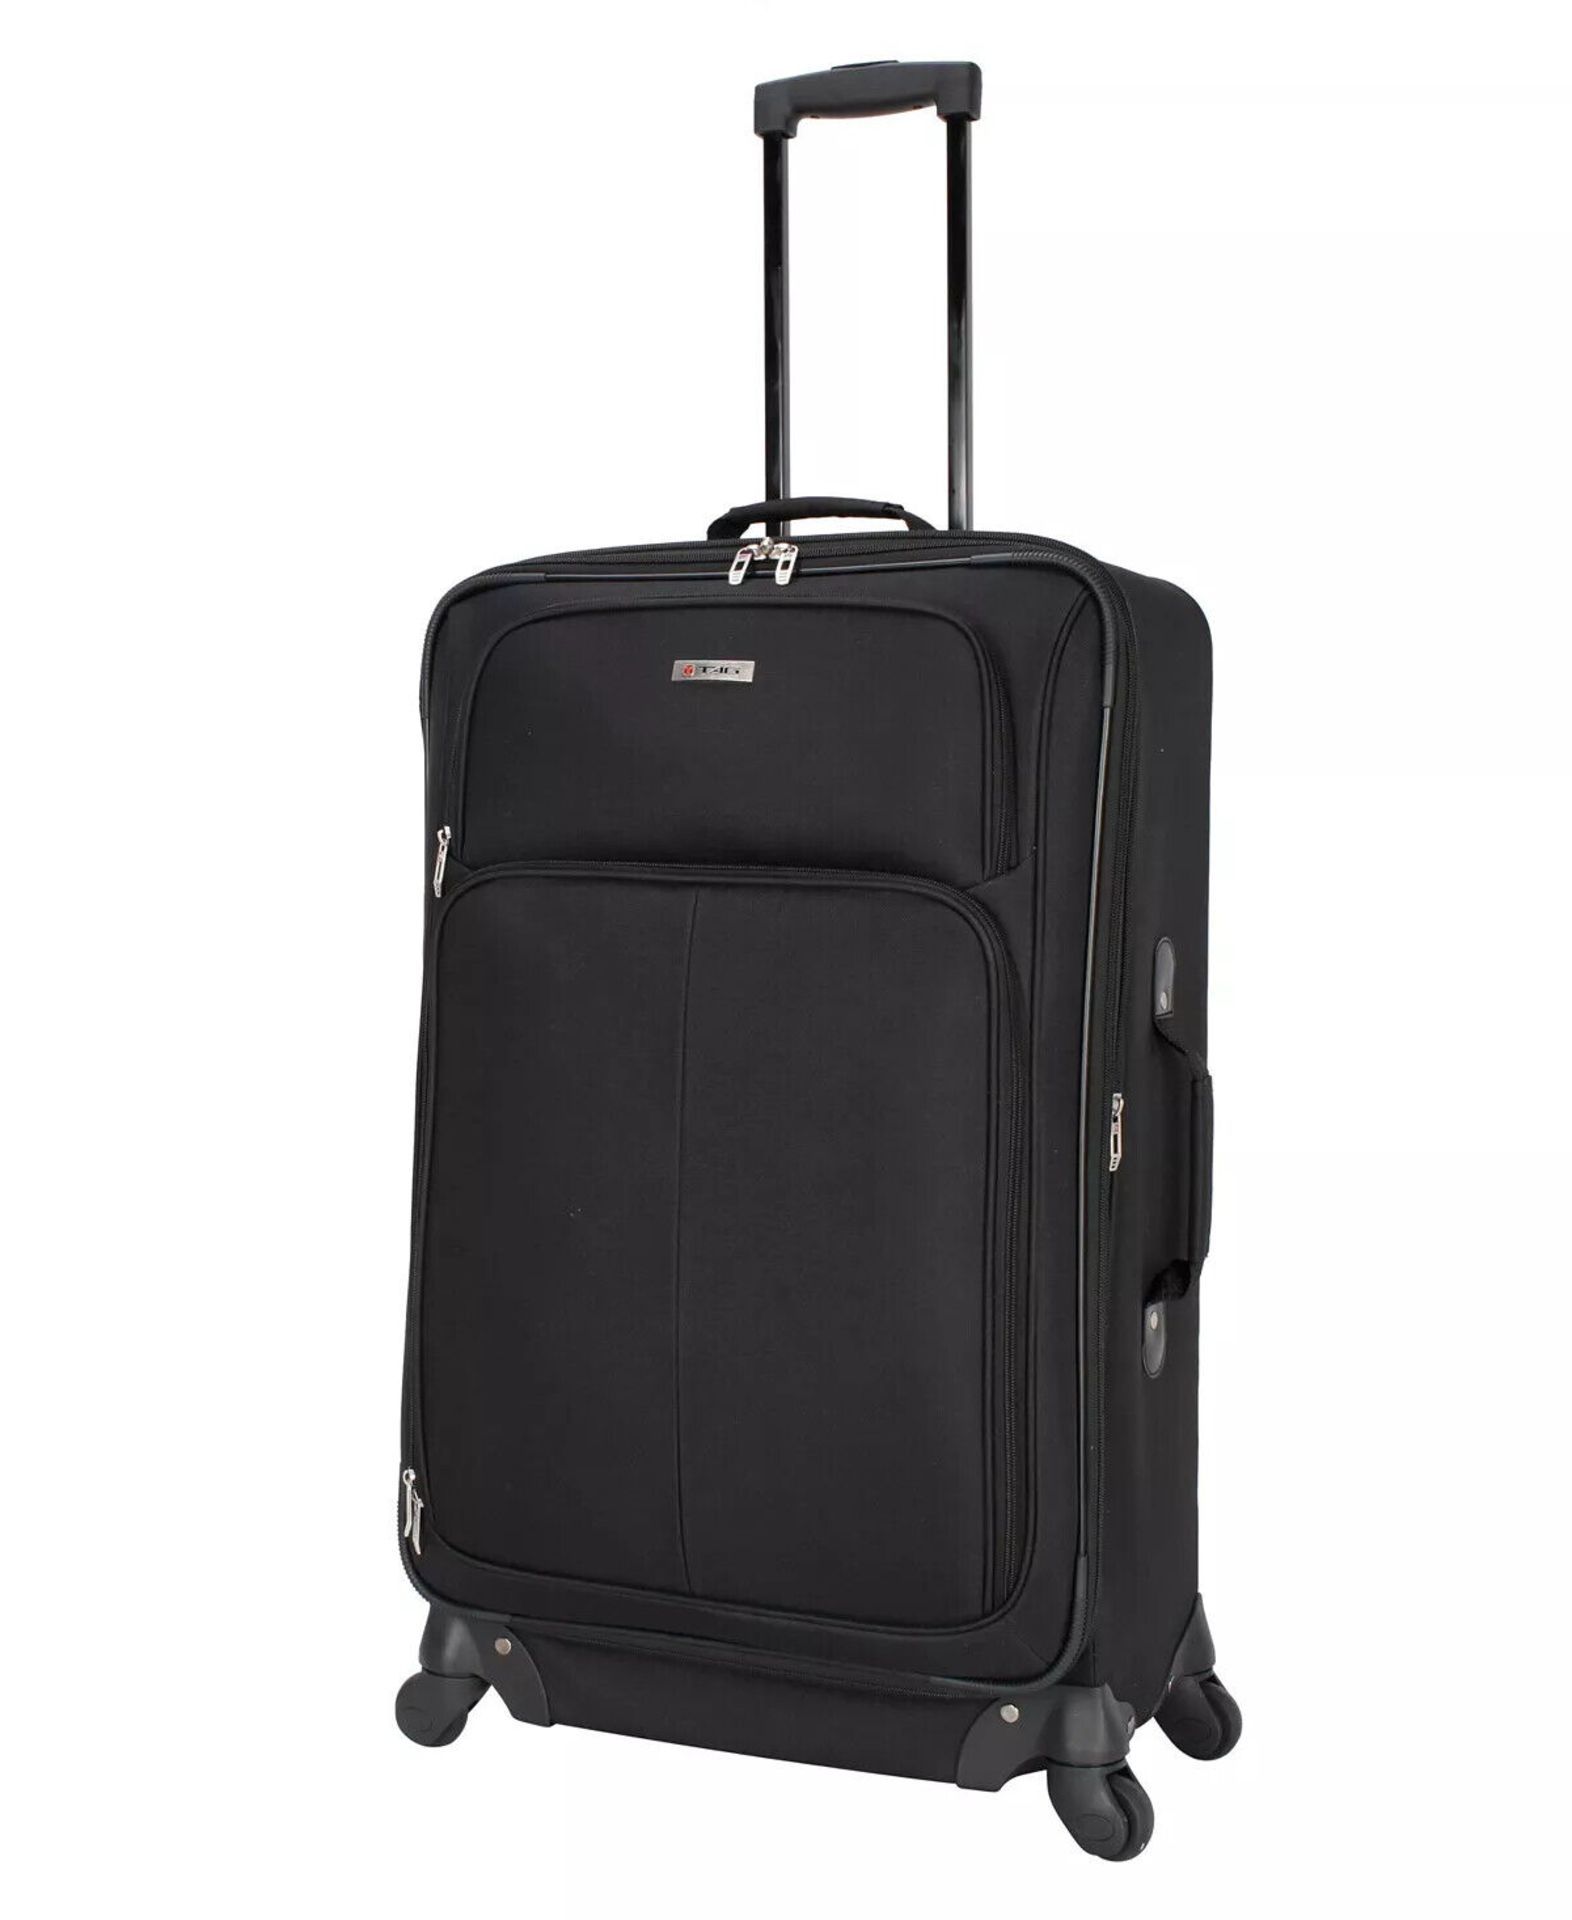 New Set OF TAG Ridgefield Black 5 Piece Softside Luggage Set. RRP $300. This classic set from Tag - Image 4 of 4